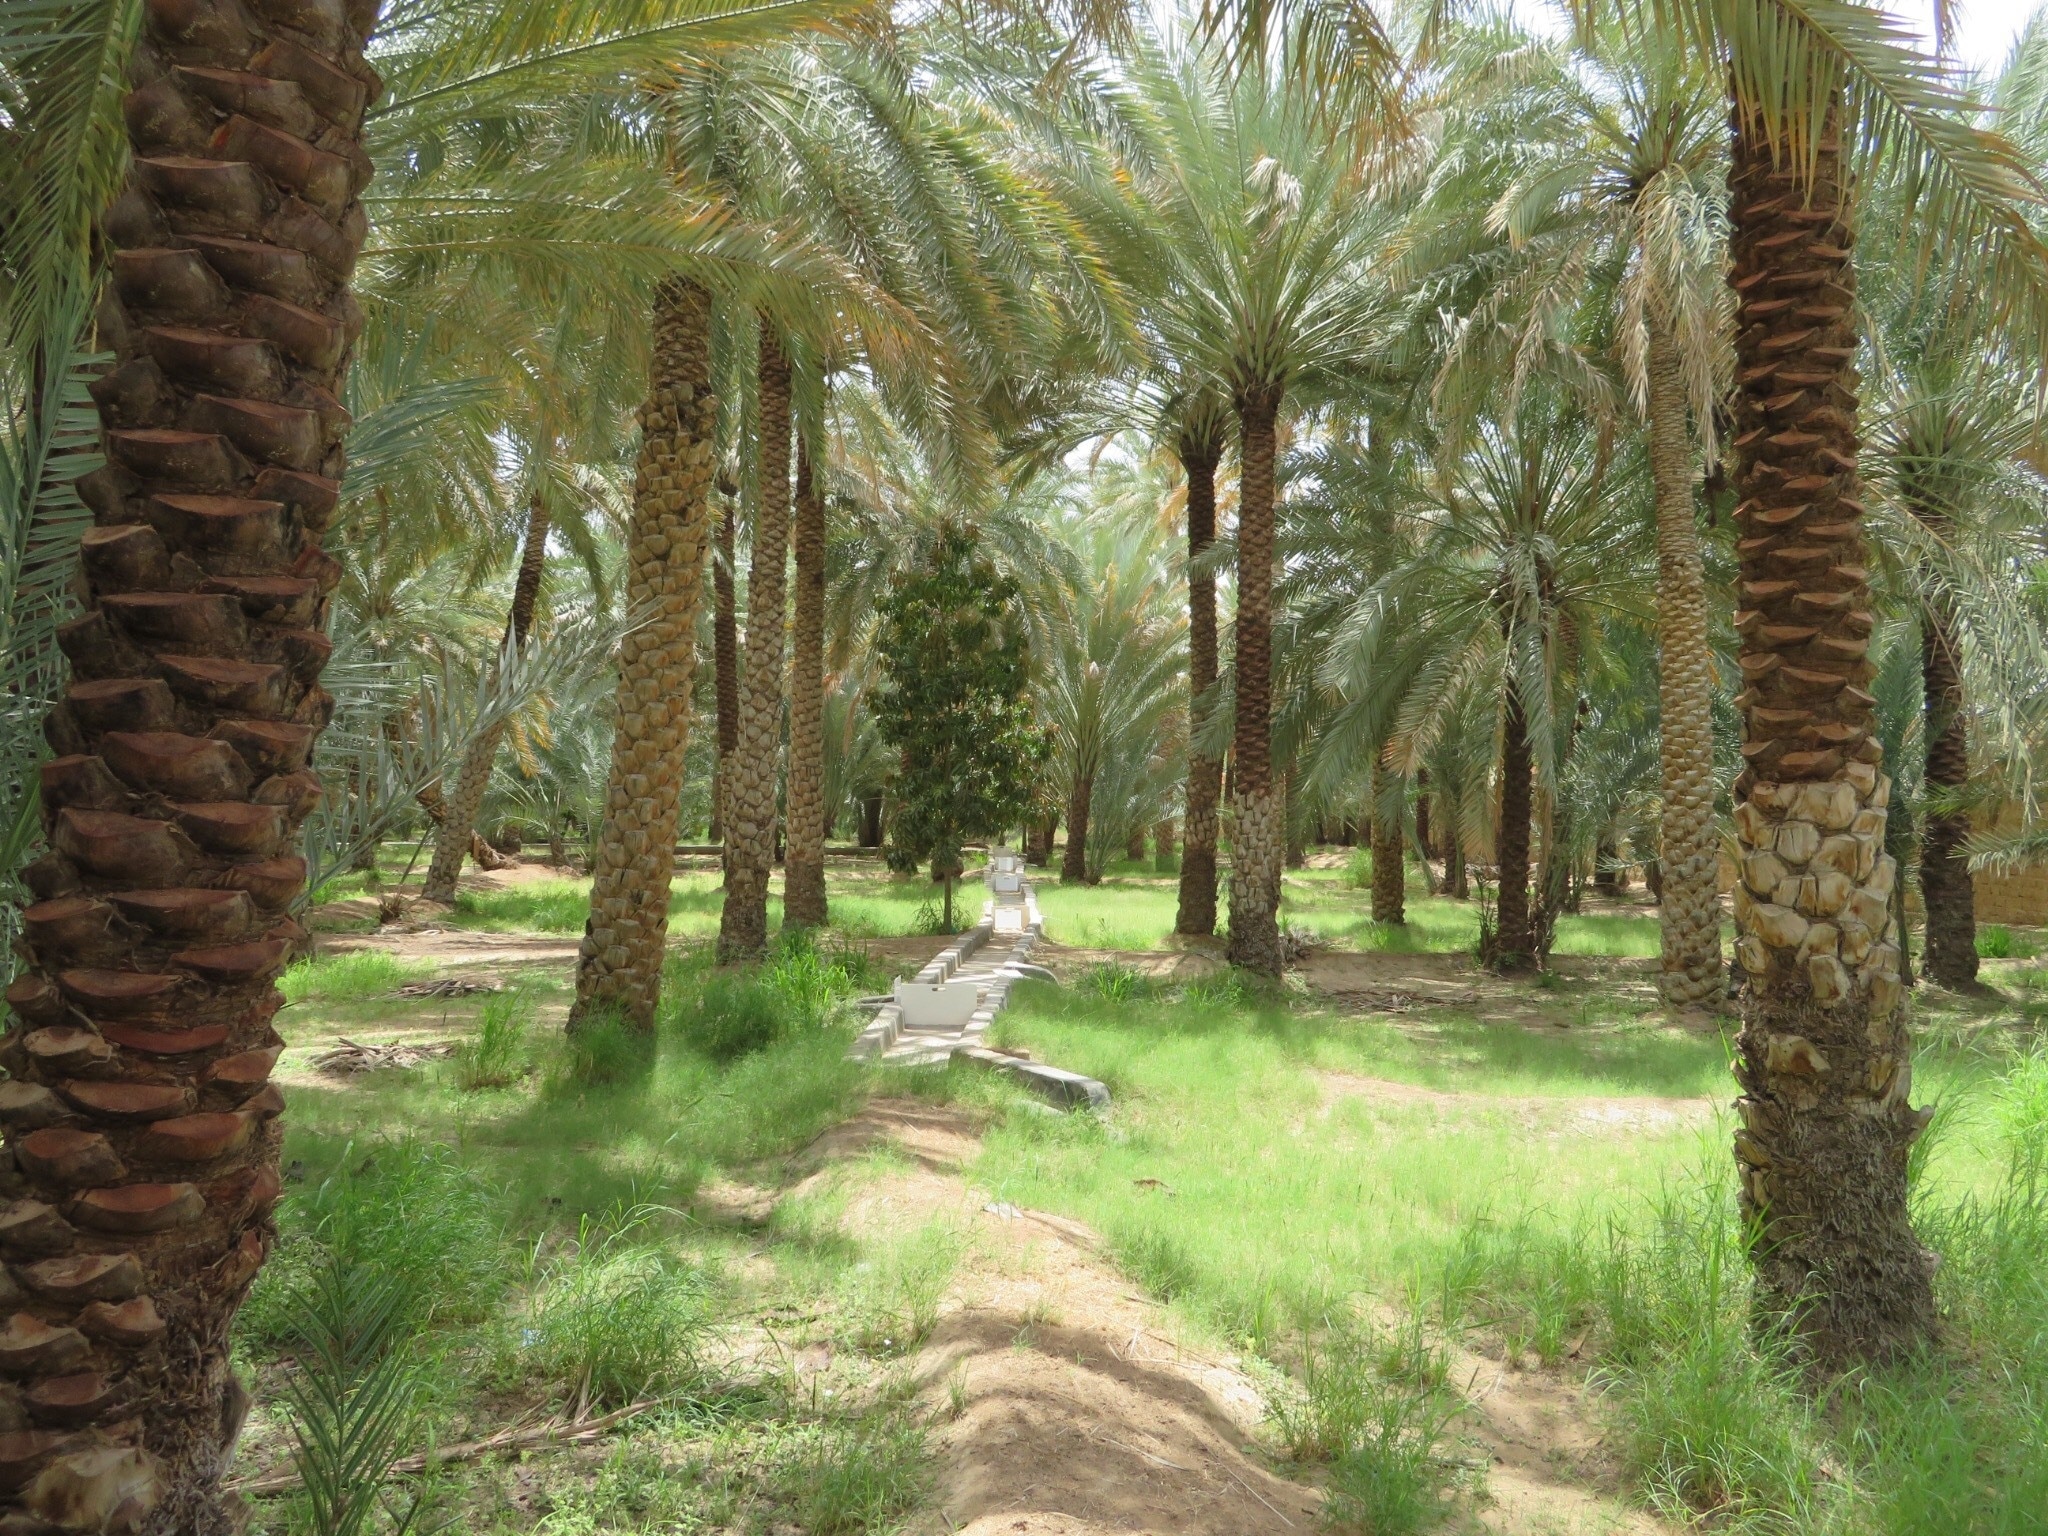 A lovely place to explore on a hot day in the UAE.